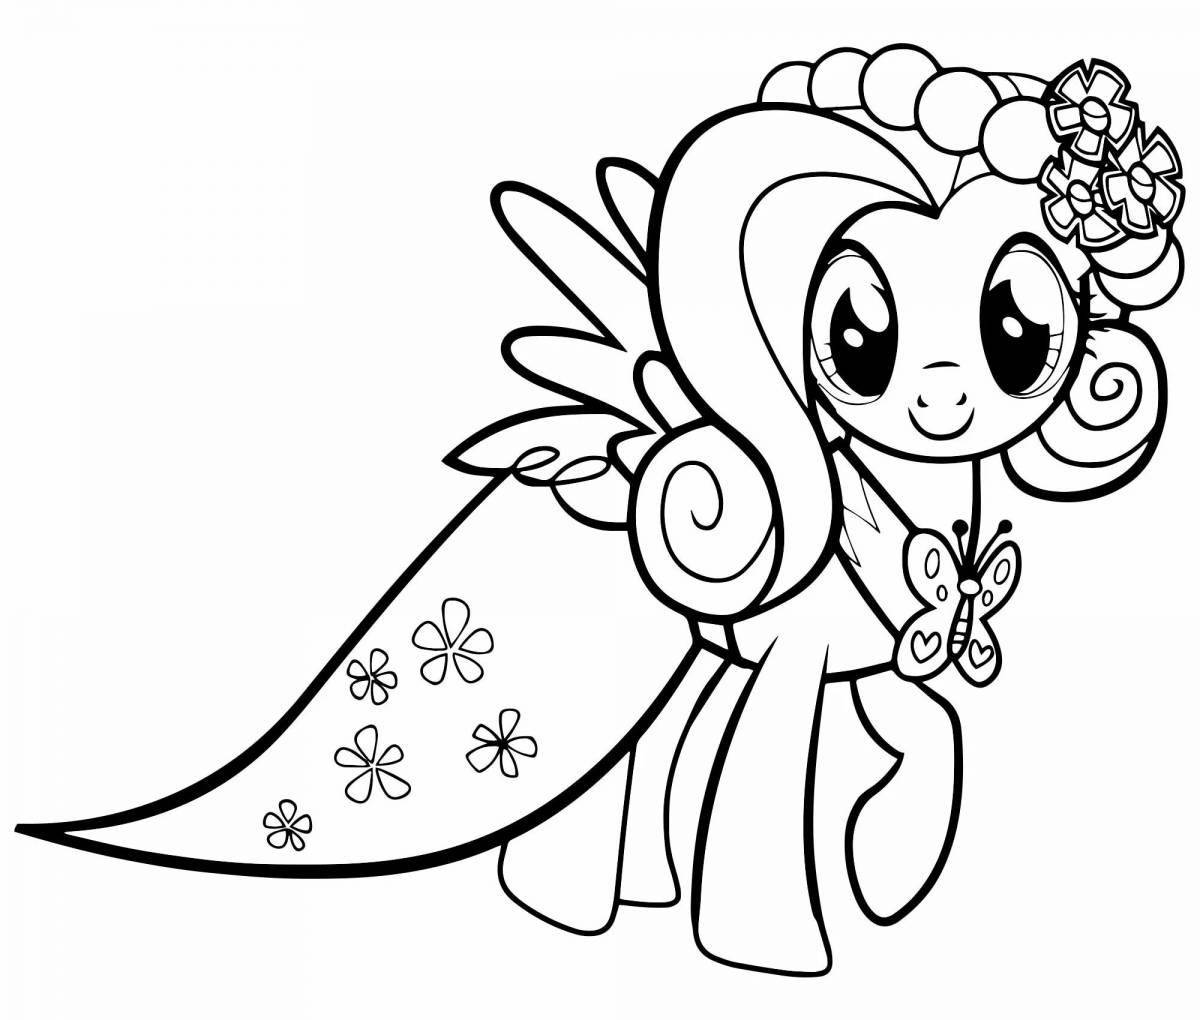 Coloring page jovial may little pony